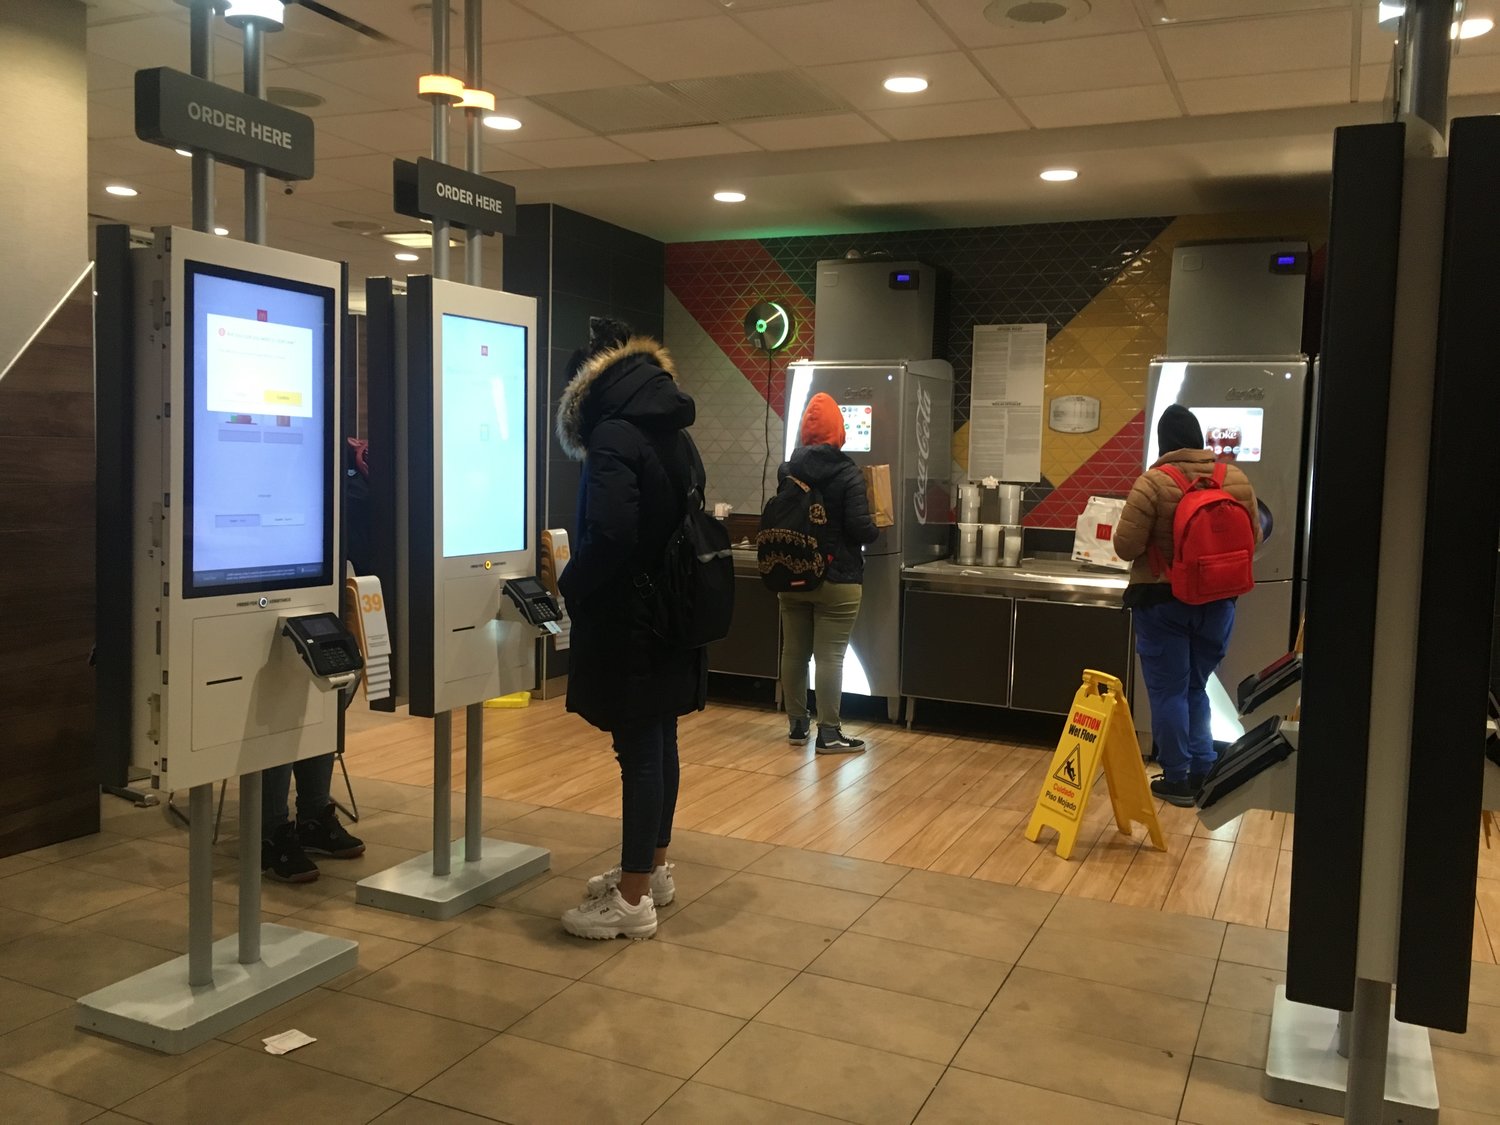 Self-serve kiosks, such as these at this McDonald’s on Chambers Street, are fast becoming features at fast-food restaurants. At a meeting of the City Council's Committee on Civil Service and Labor last week, advocates voiced concern that nearly half a million New York City jobs, the vast majority done by low-income employees, are highly susceptible to automation. They called on officials to set up more “bridge” programs to help those workers develop new skills.